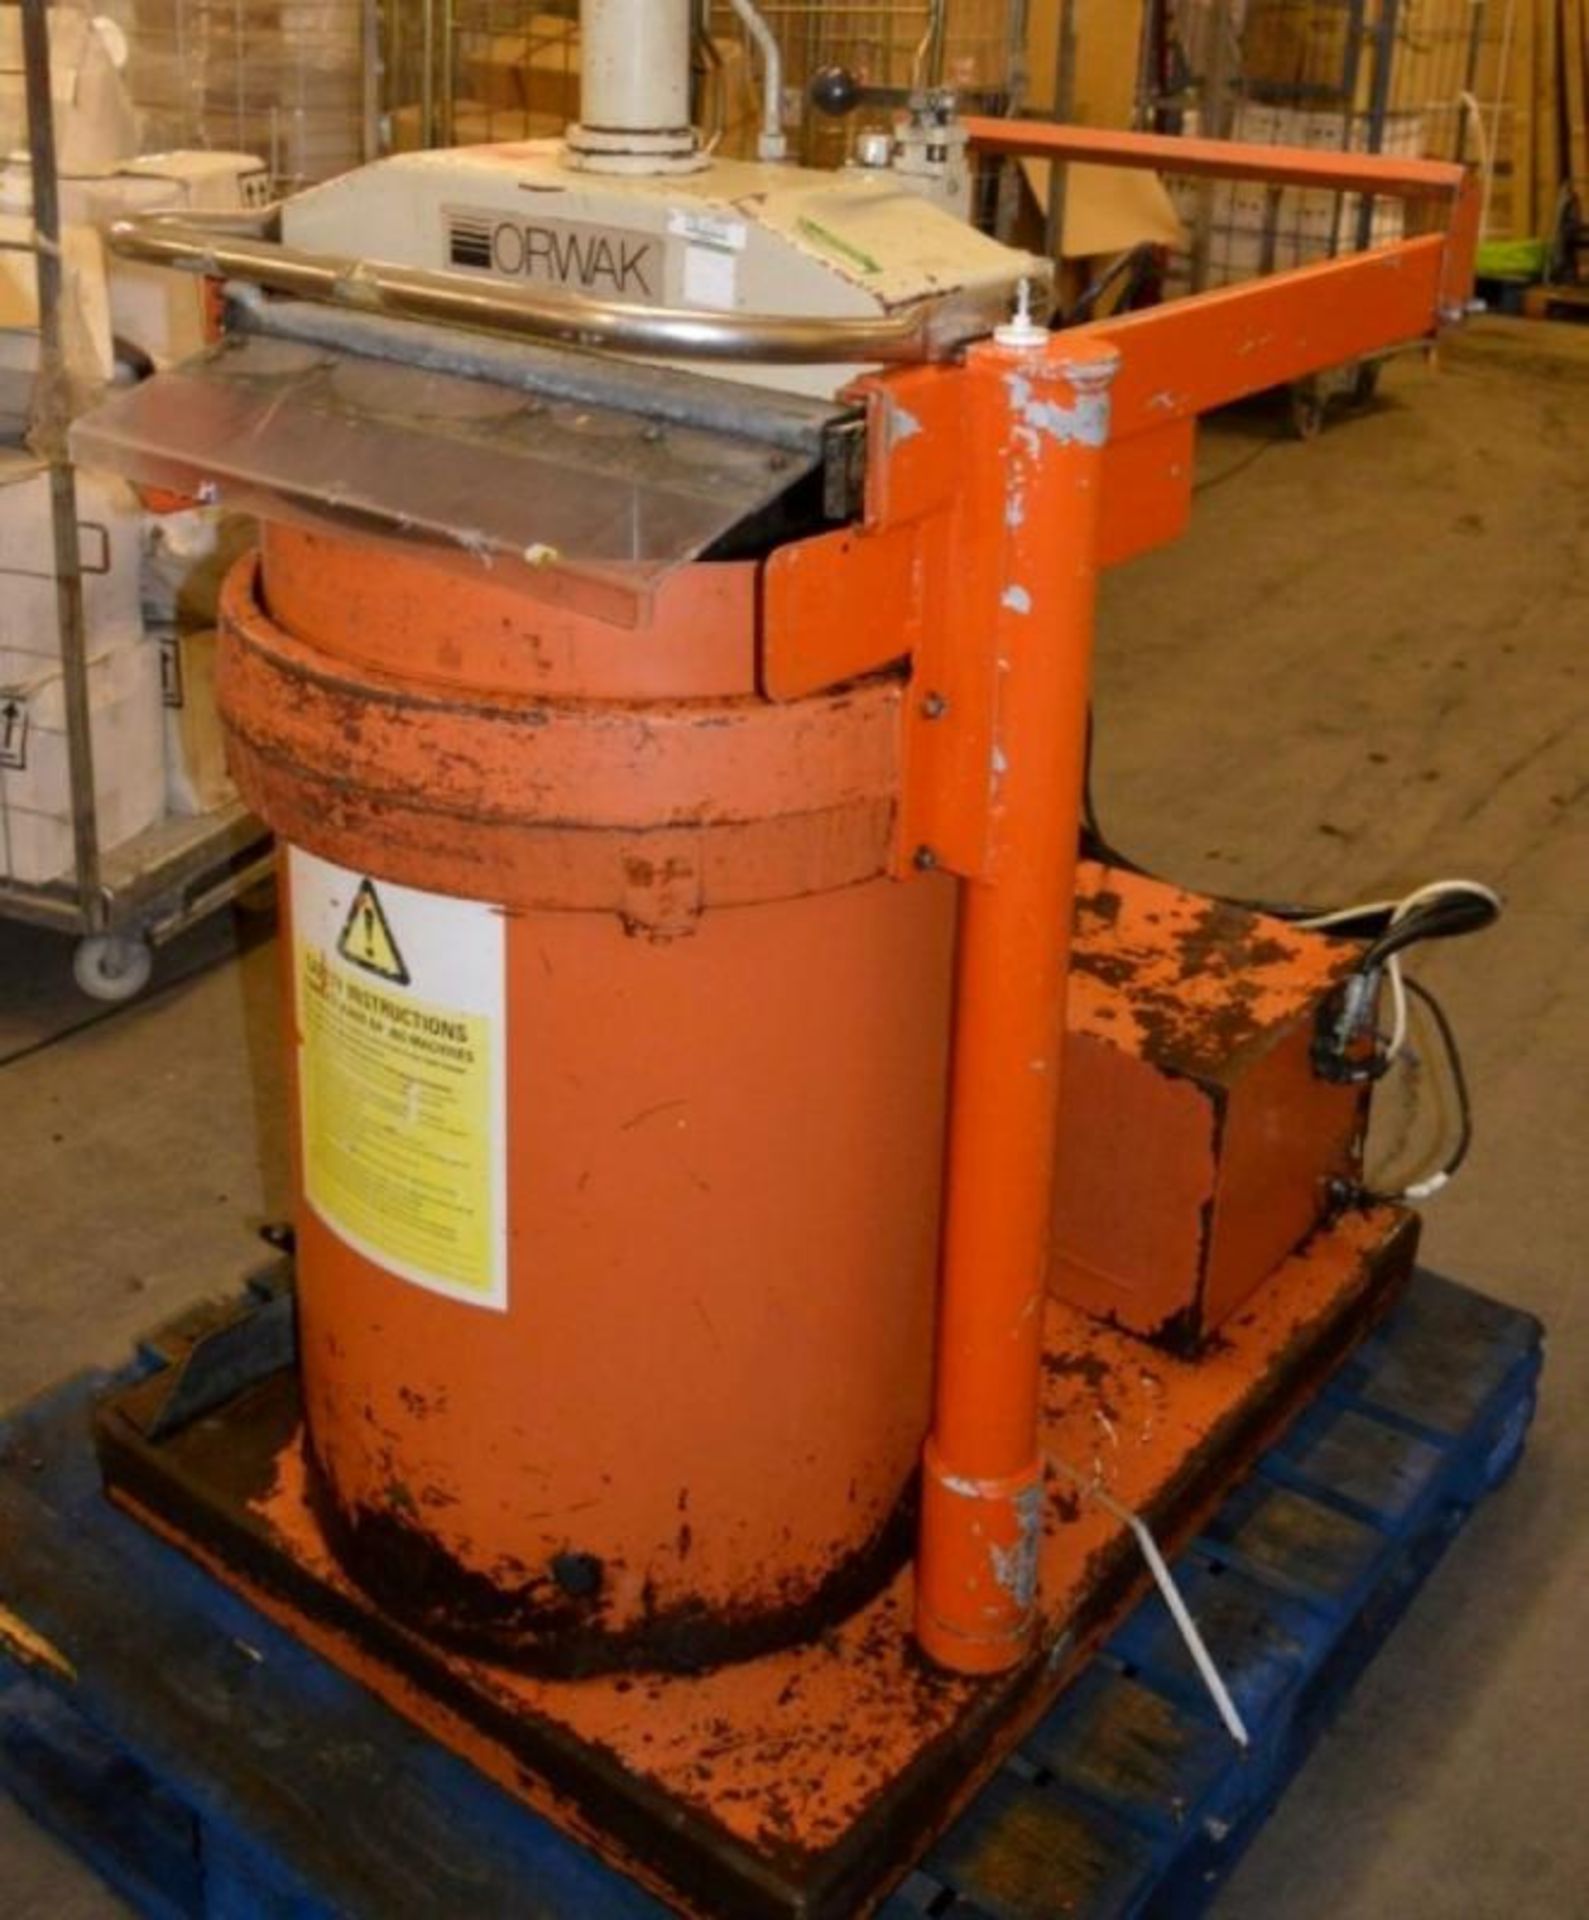 1 x Orwak 5030 Waste Compactor Bailer - Used For Compacting Recyclable or Non-Recyclable Waste - Red - Image 4 of 4